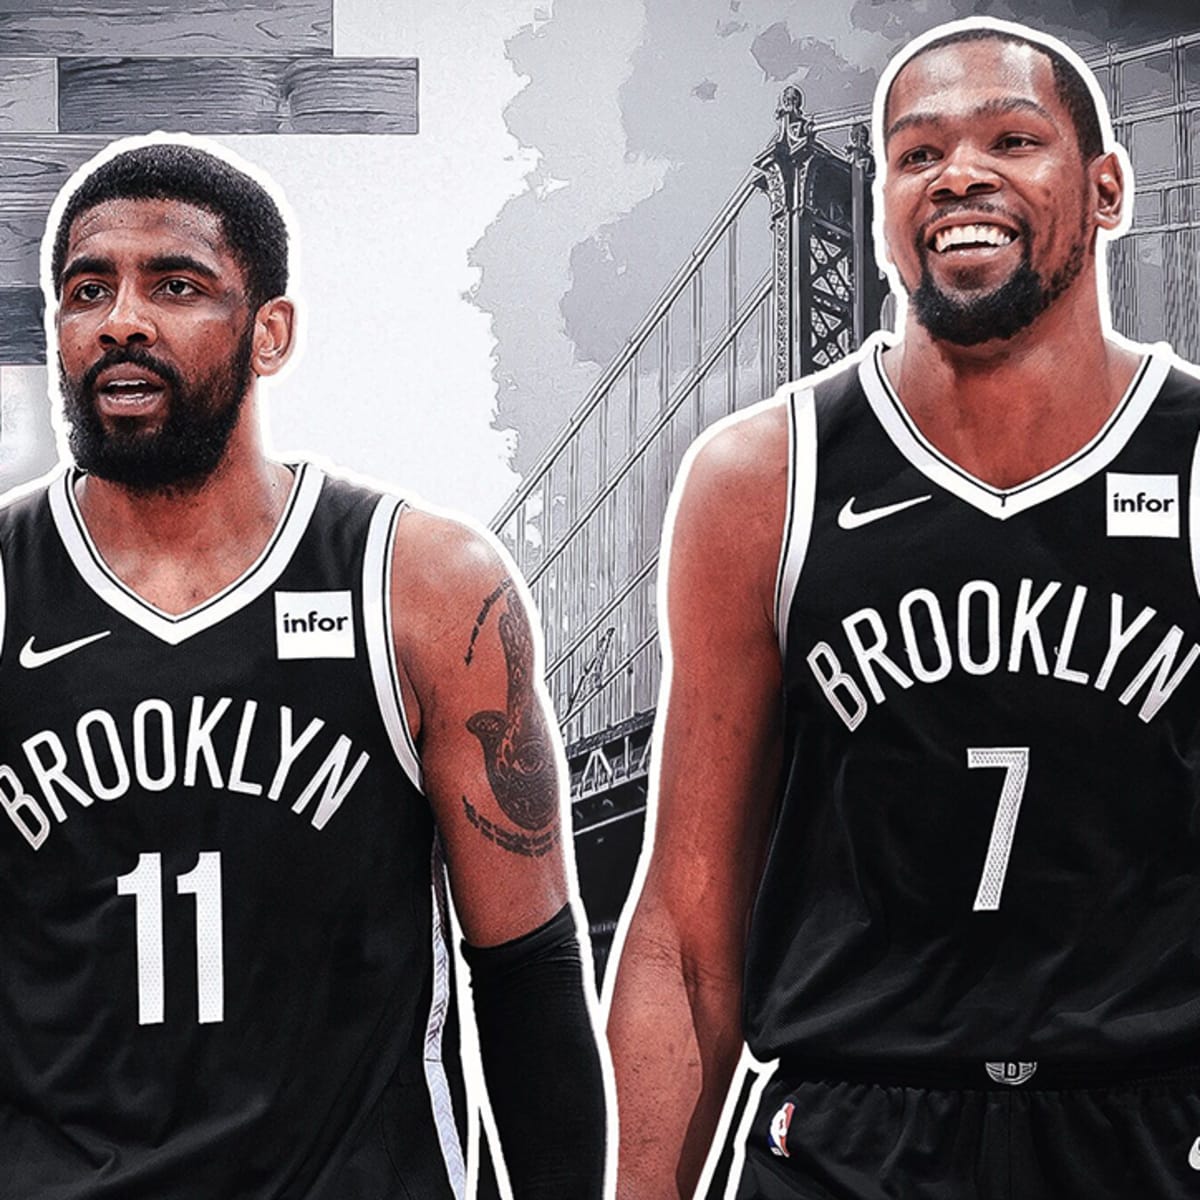 New mock trade has Nets sending Kevin Durant to Celtics in a deal